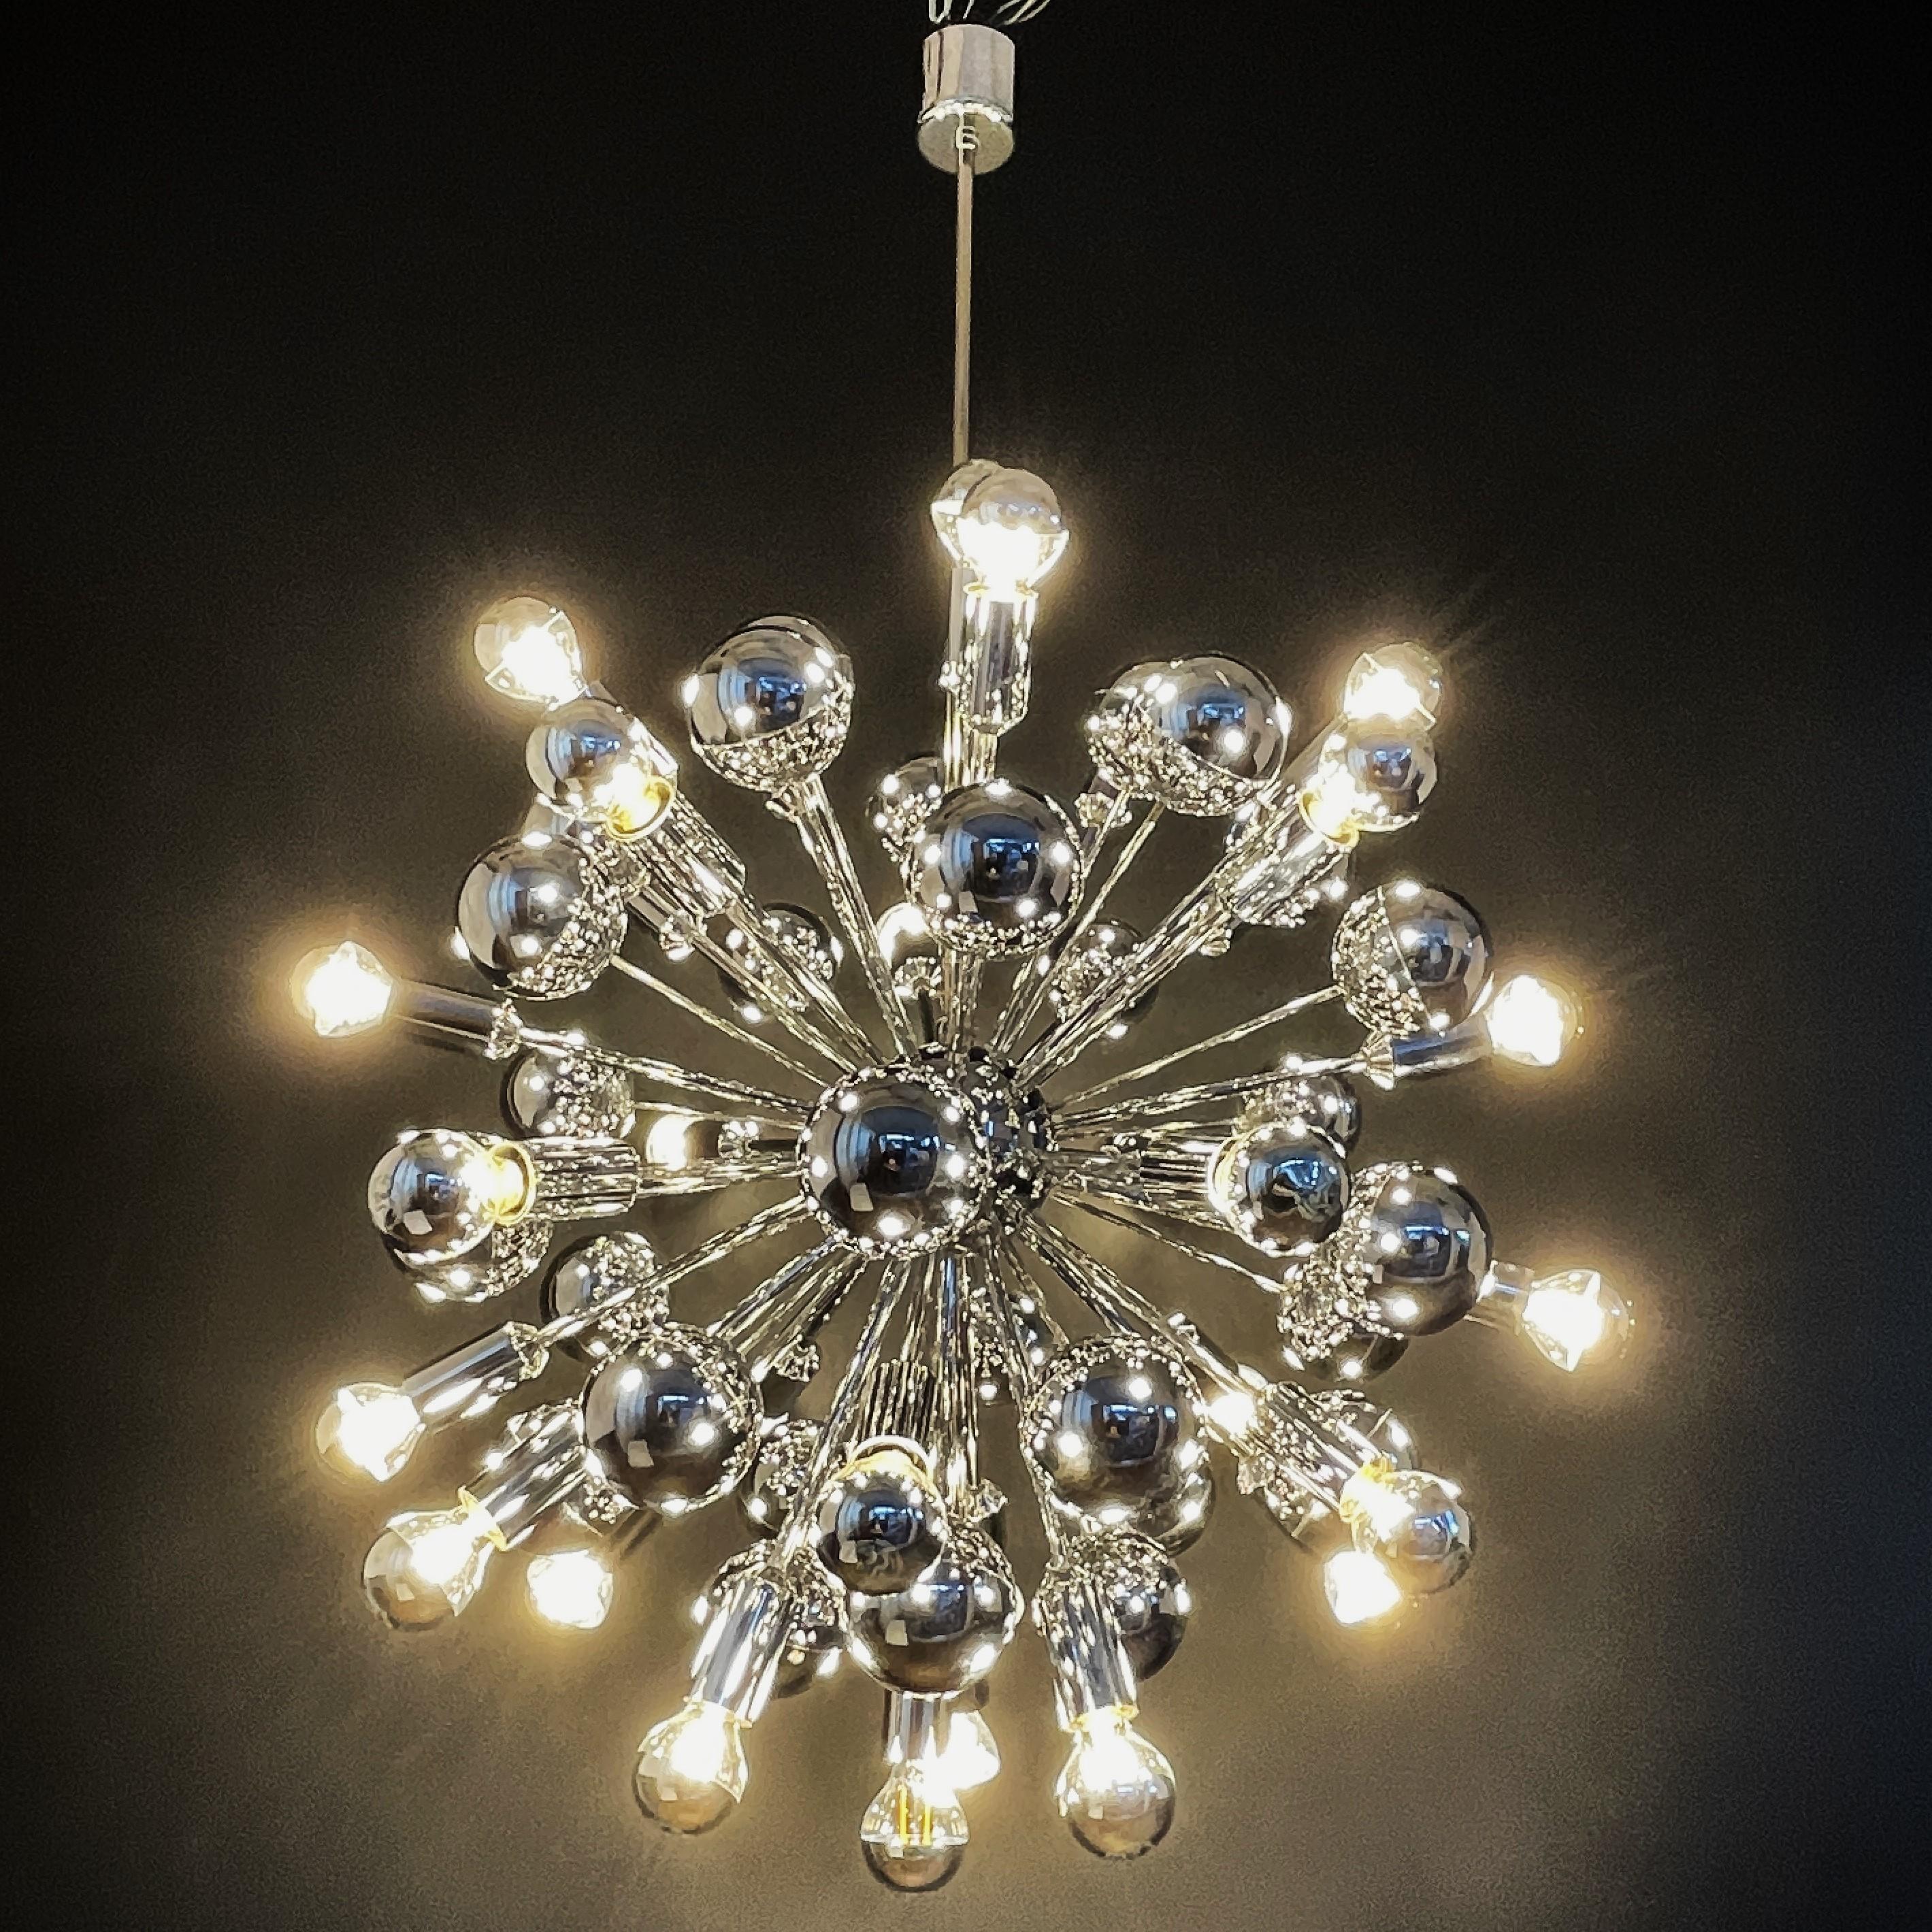 German chrom Sputnik Ceiling Lamp by Cosack, 1970s For Sale